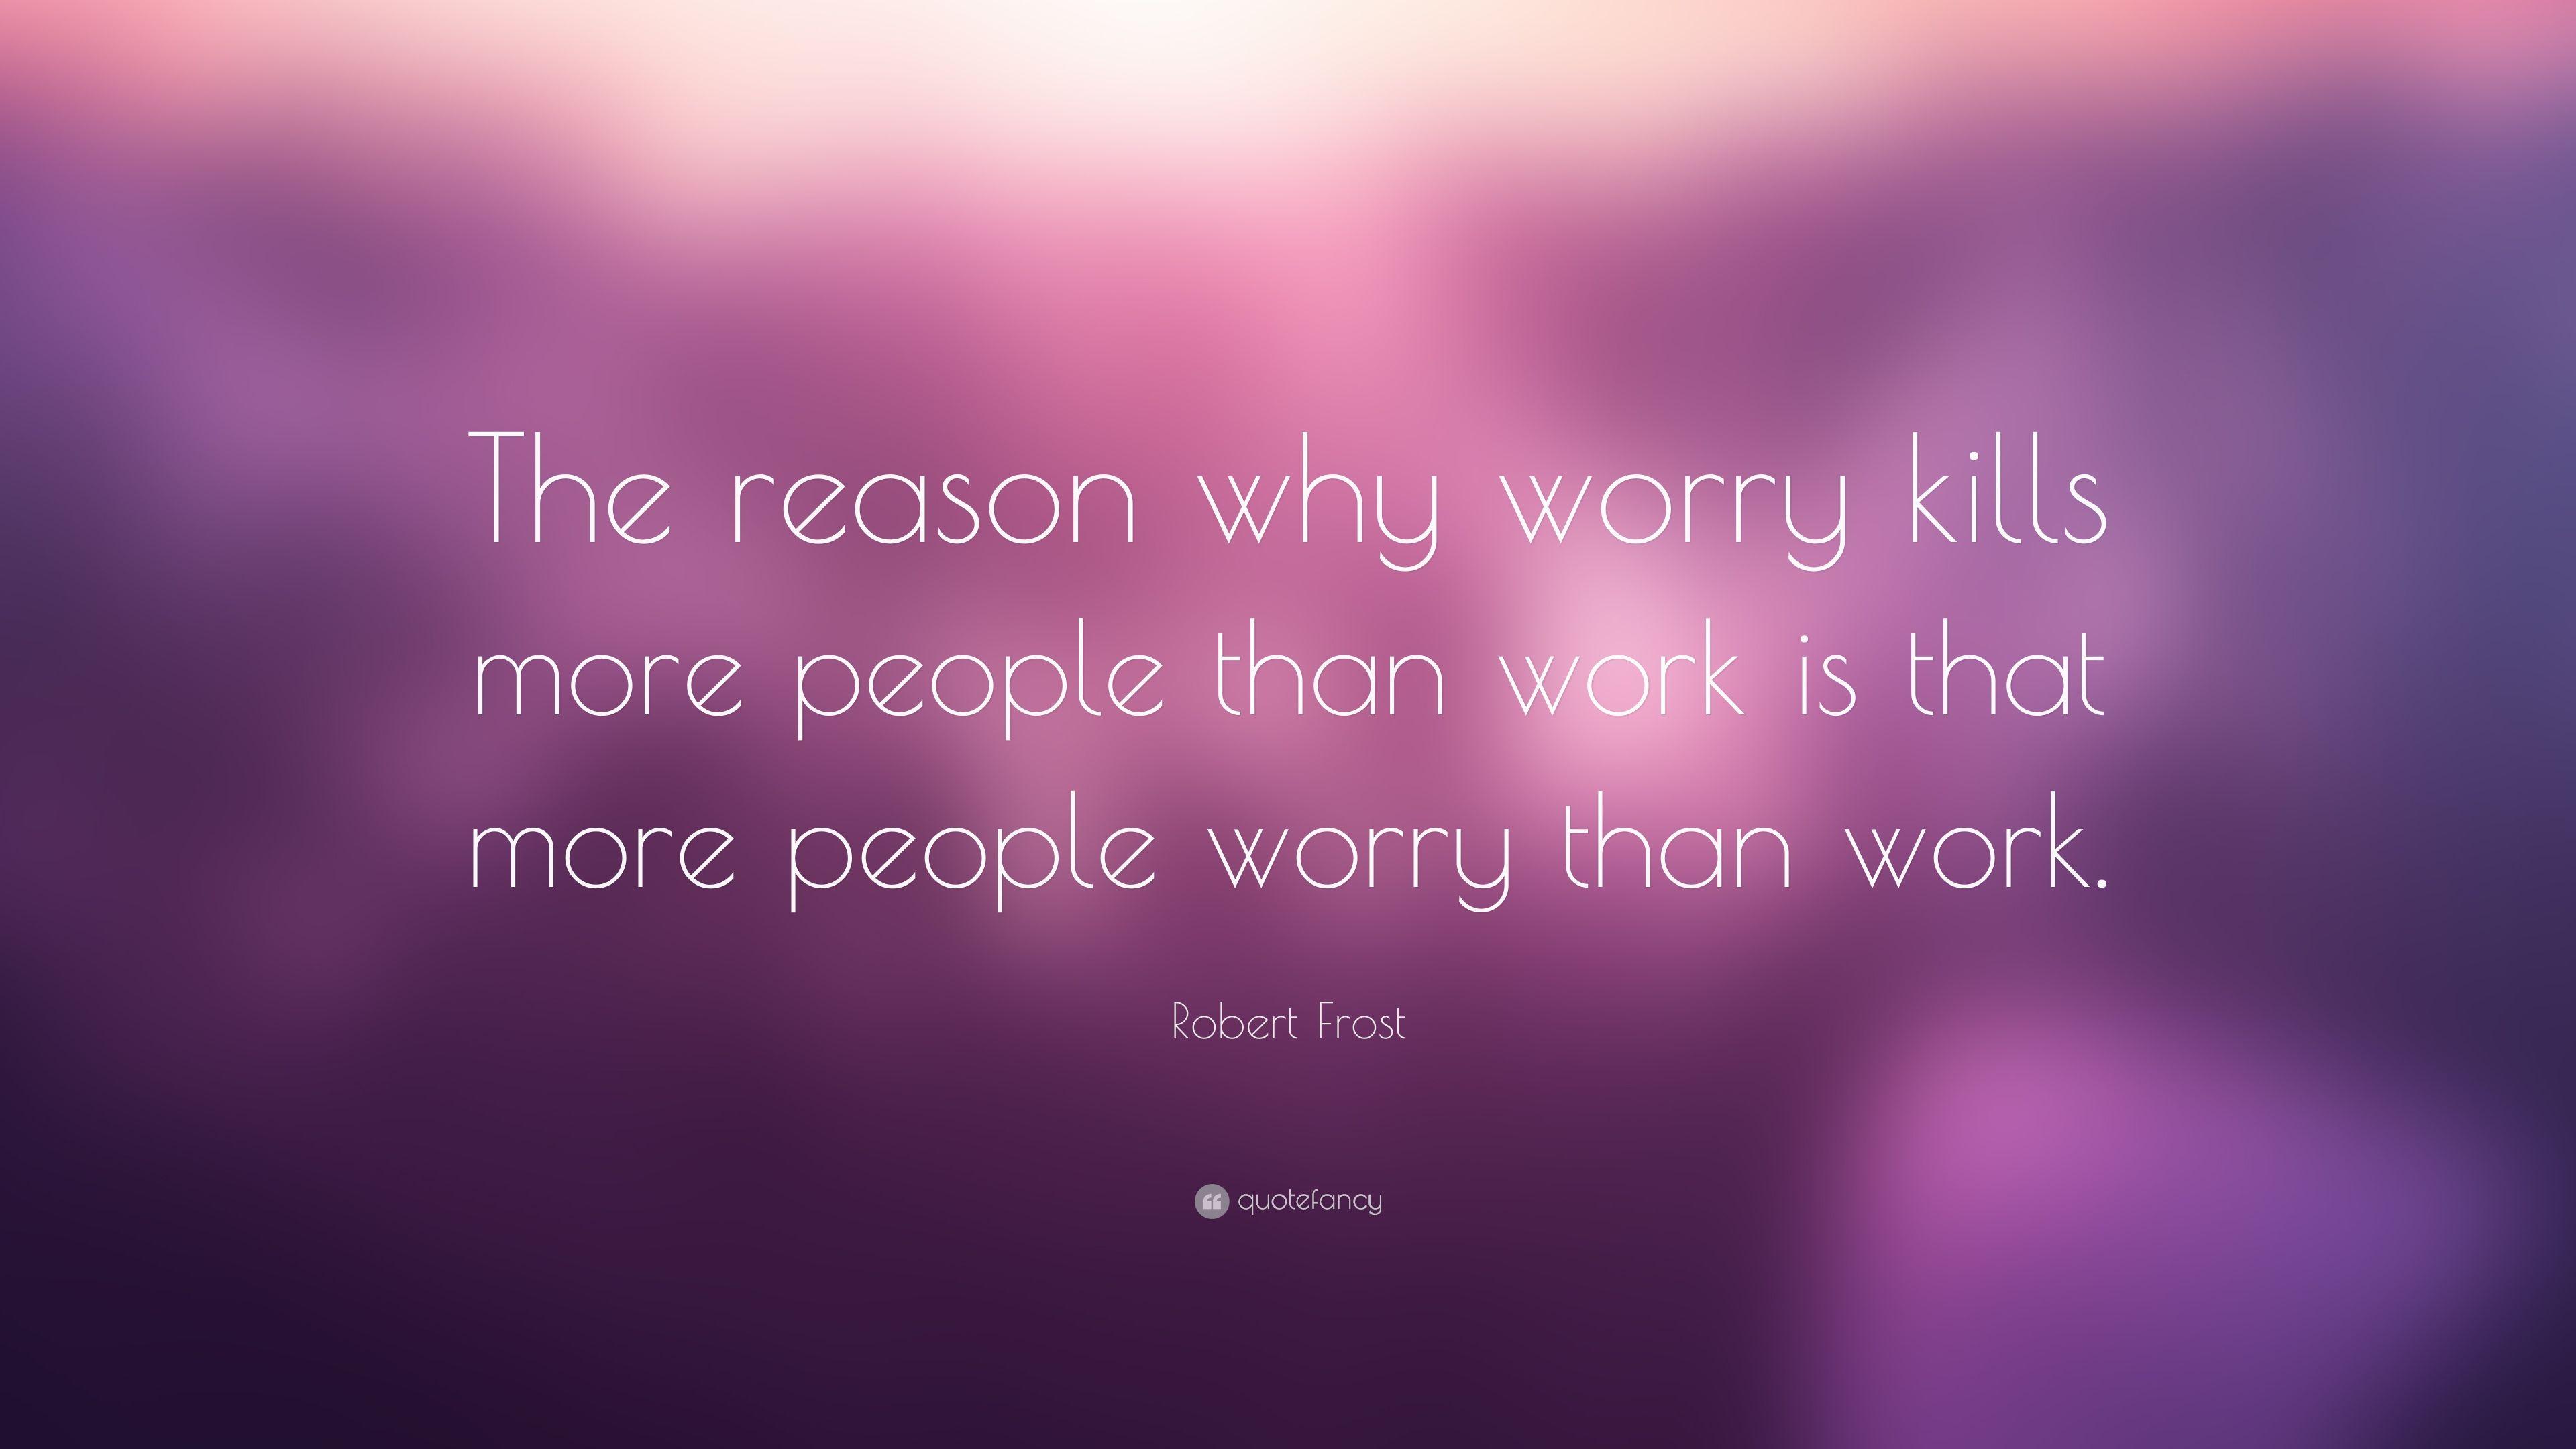 Robert Frost Quote: “The reason why worry kills more people than